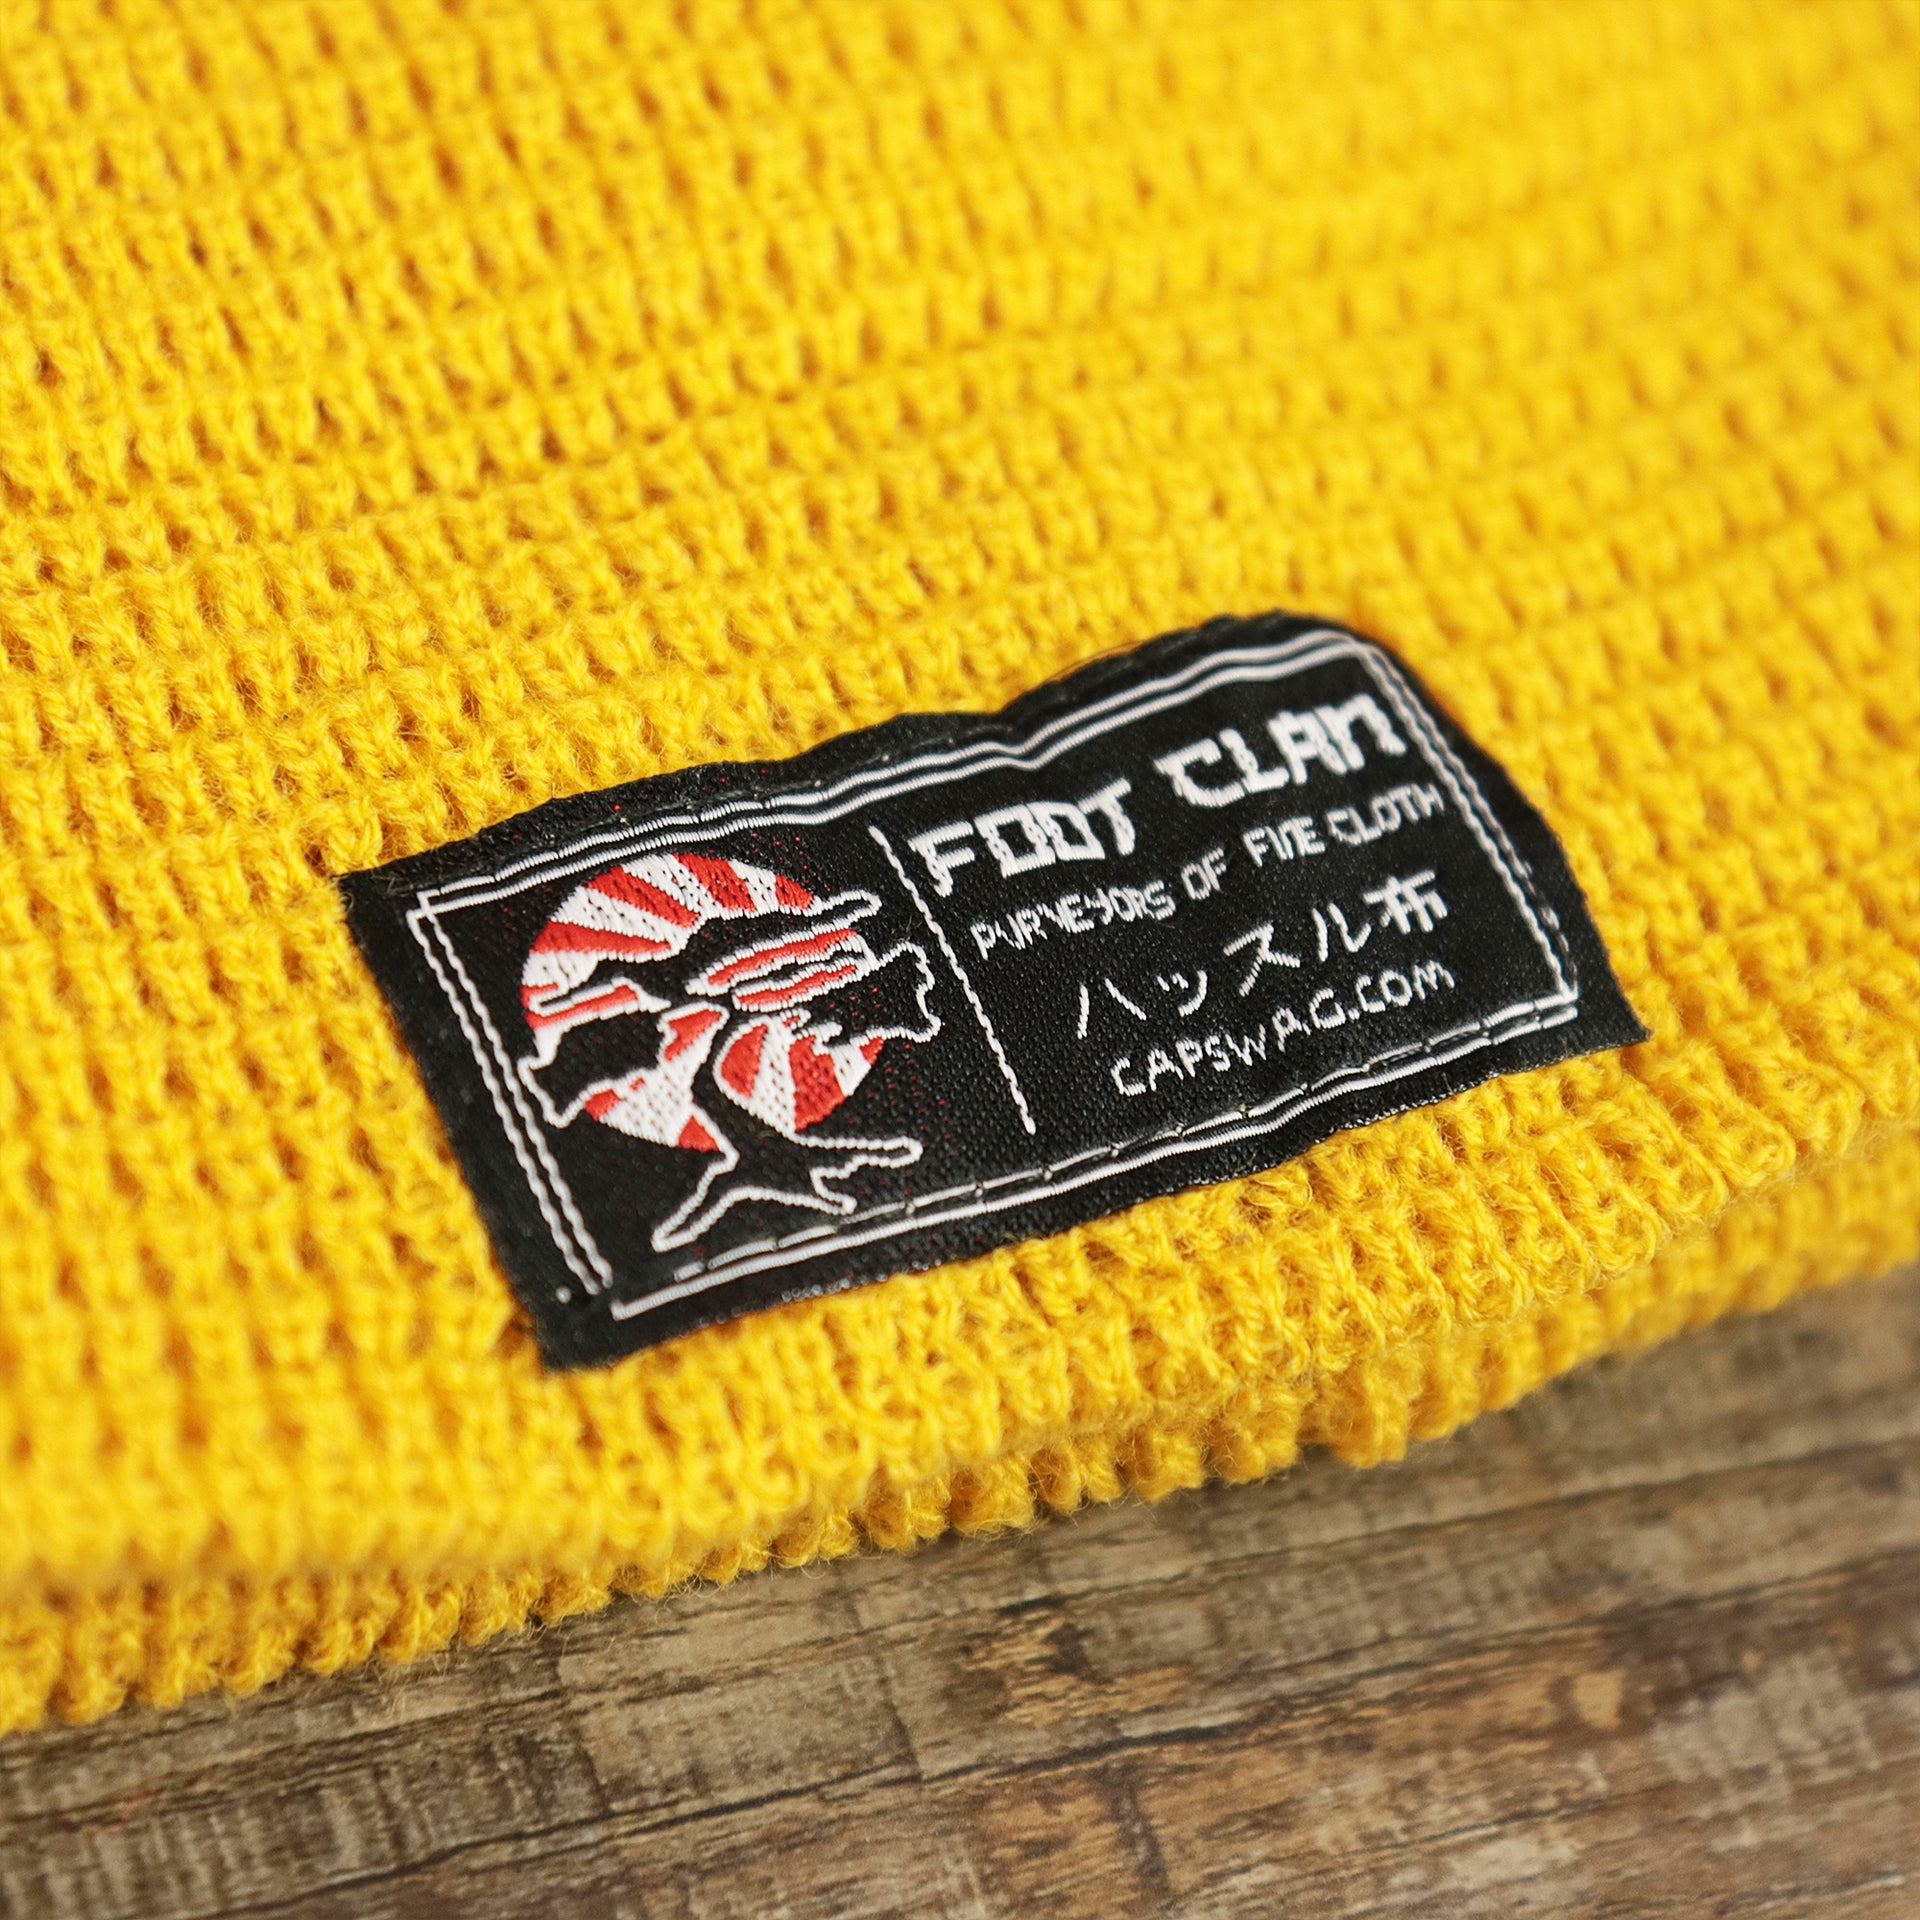 The Foot Clan Tag on the Mustard Golden Yellow Fisherman Knit Cuffed Beanie